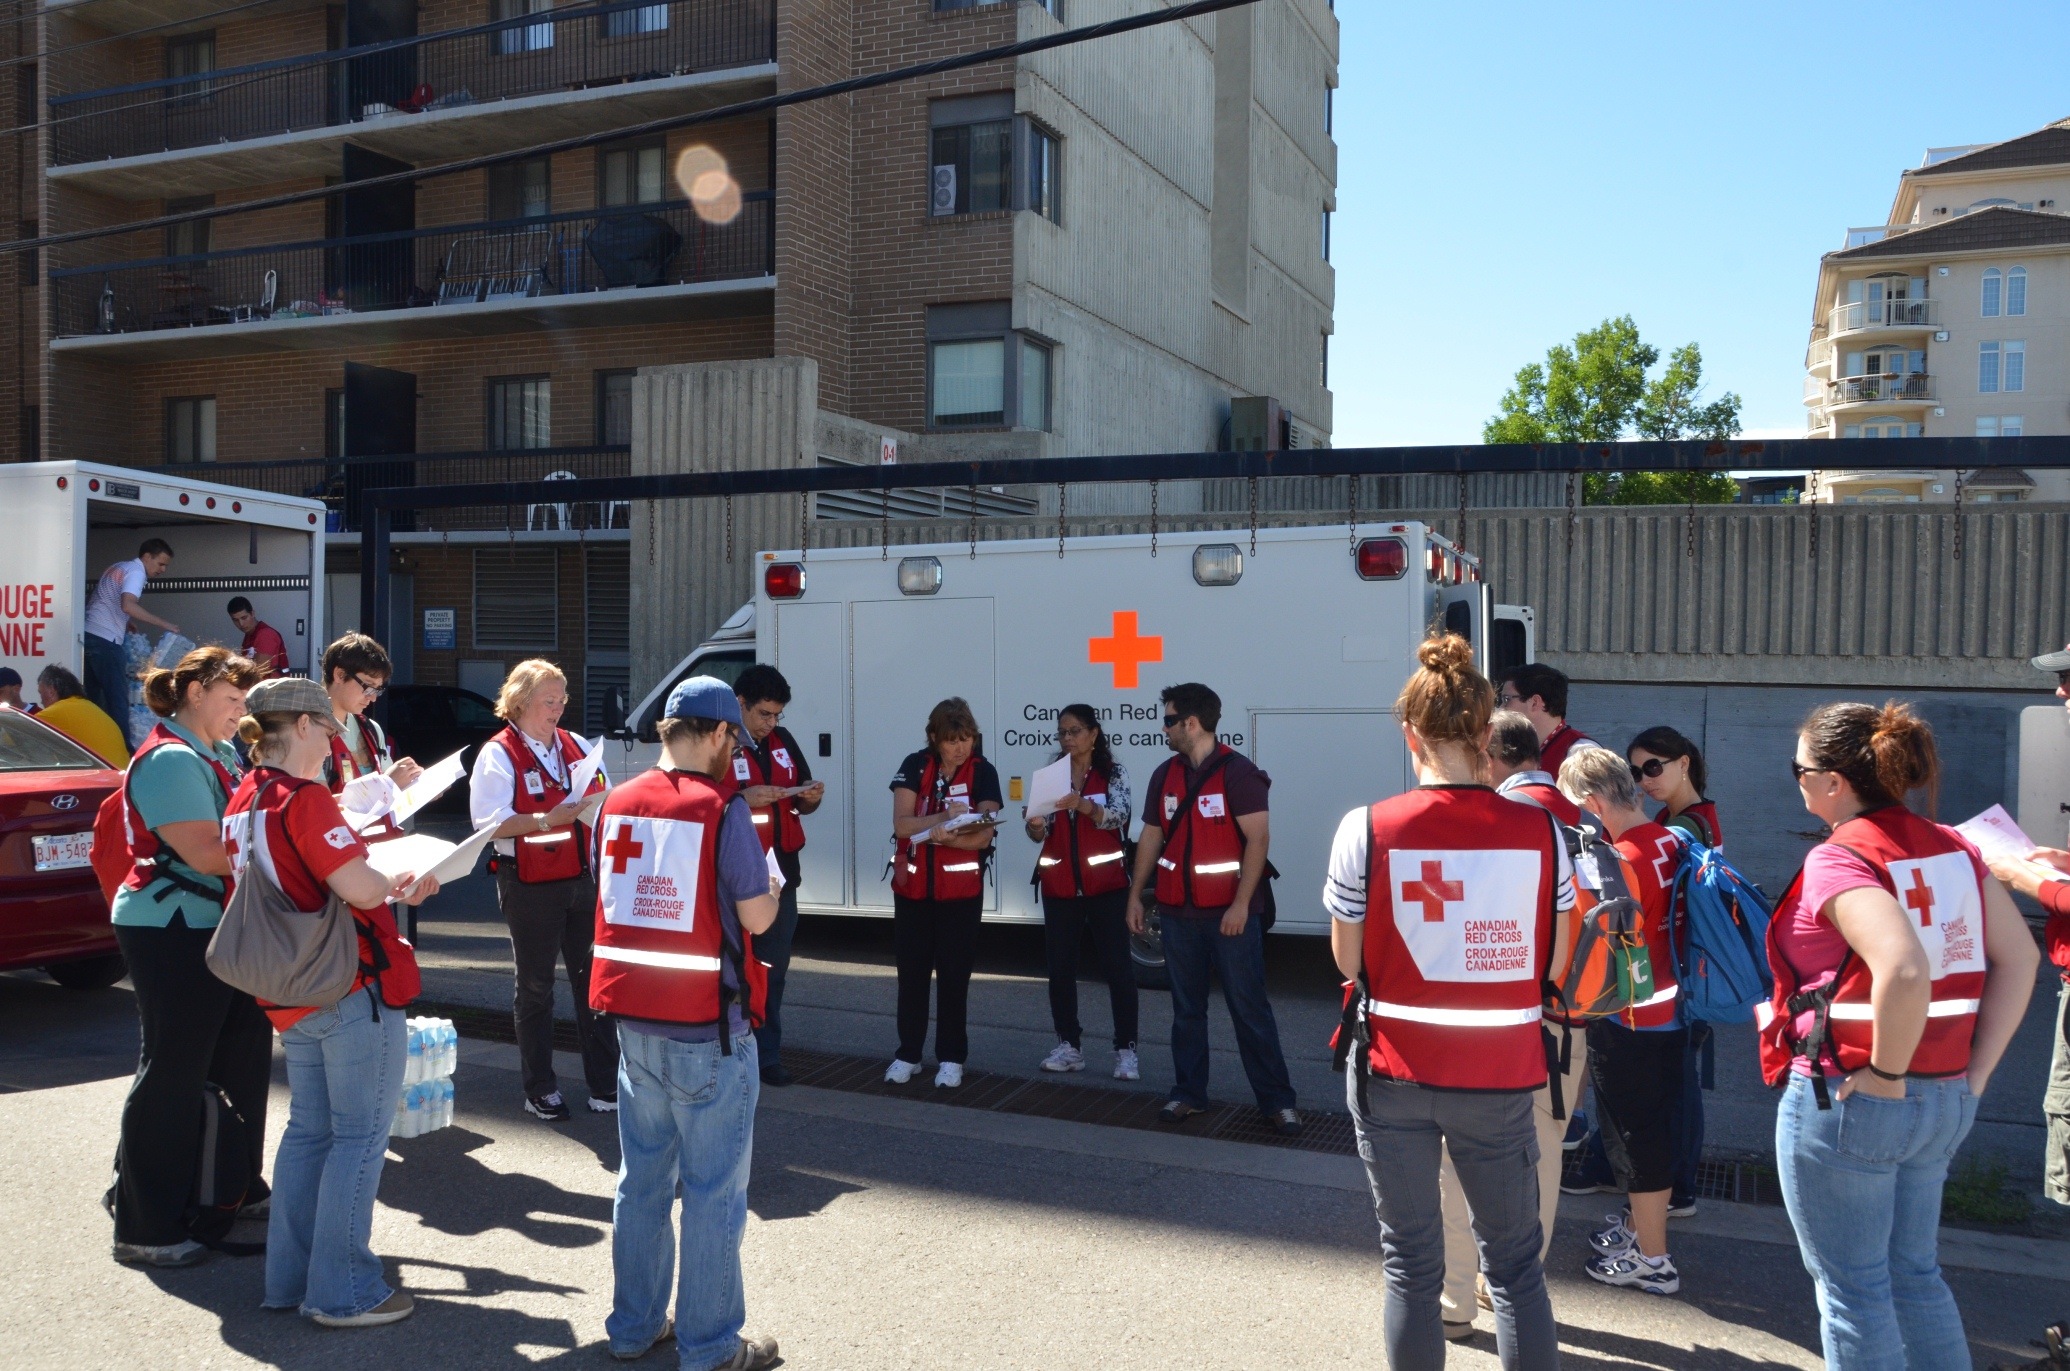 While disaster response volunteers were busy on the ground in Alberta, digital volunteers took to Twitter to help out.